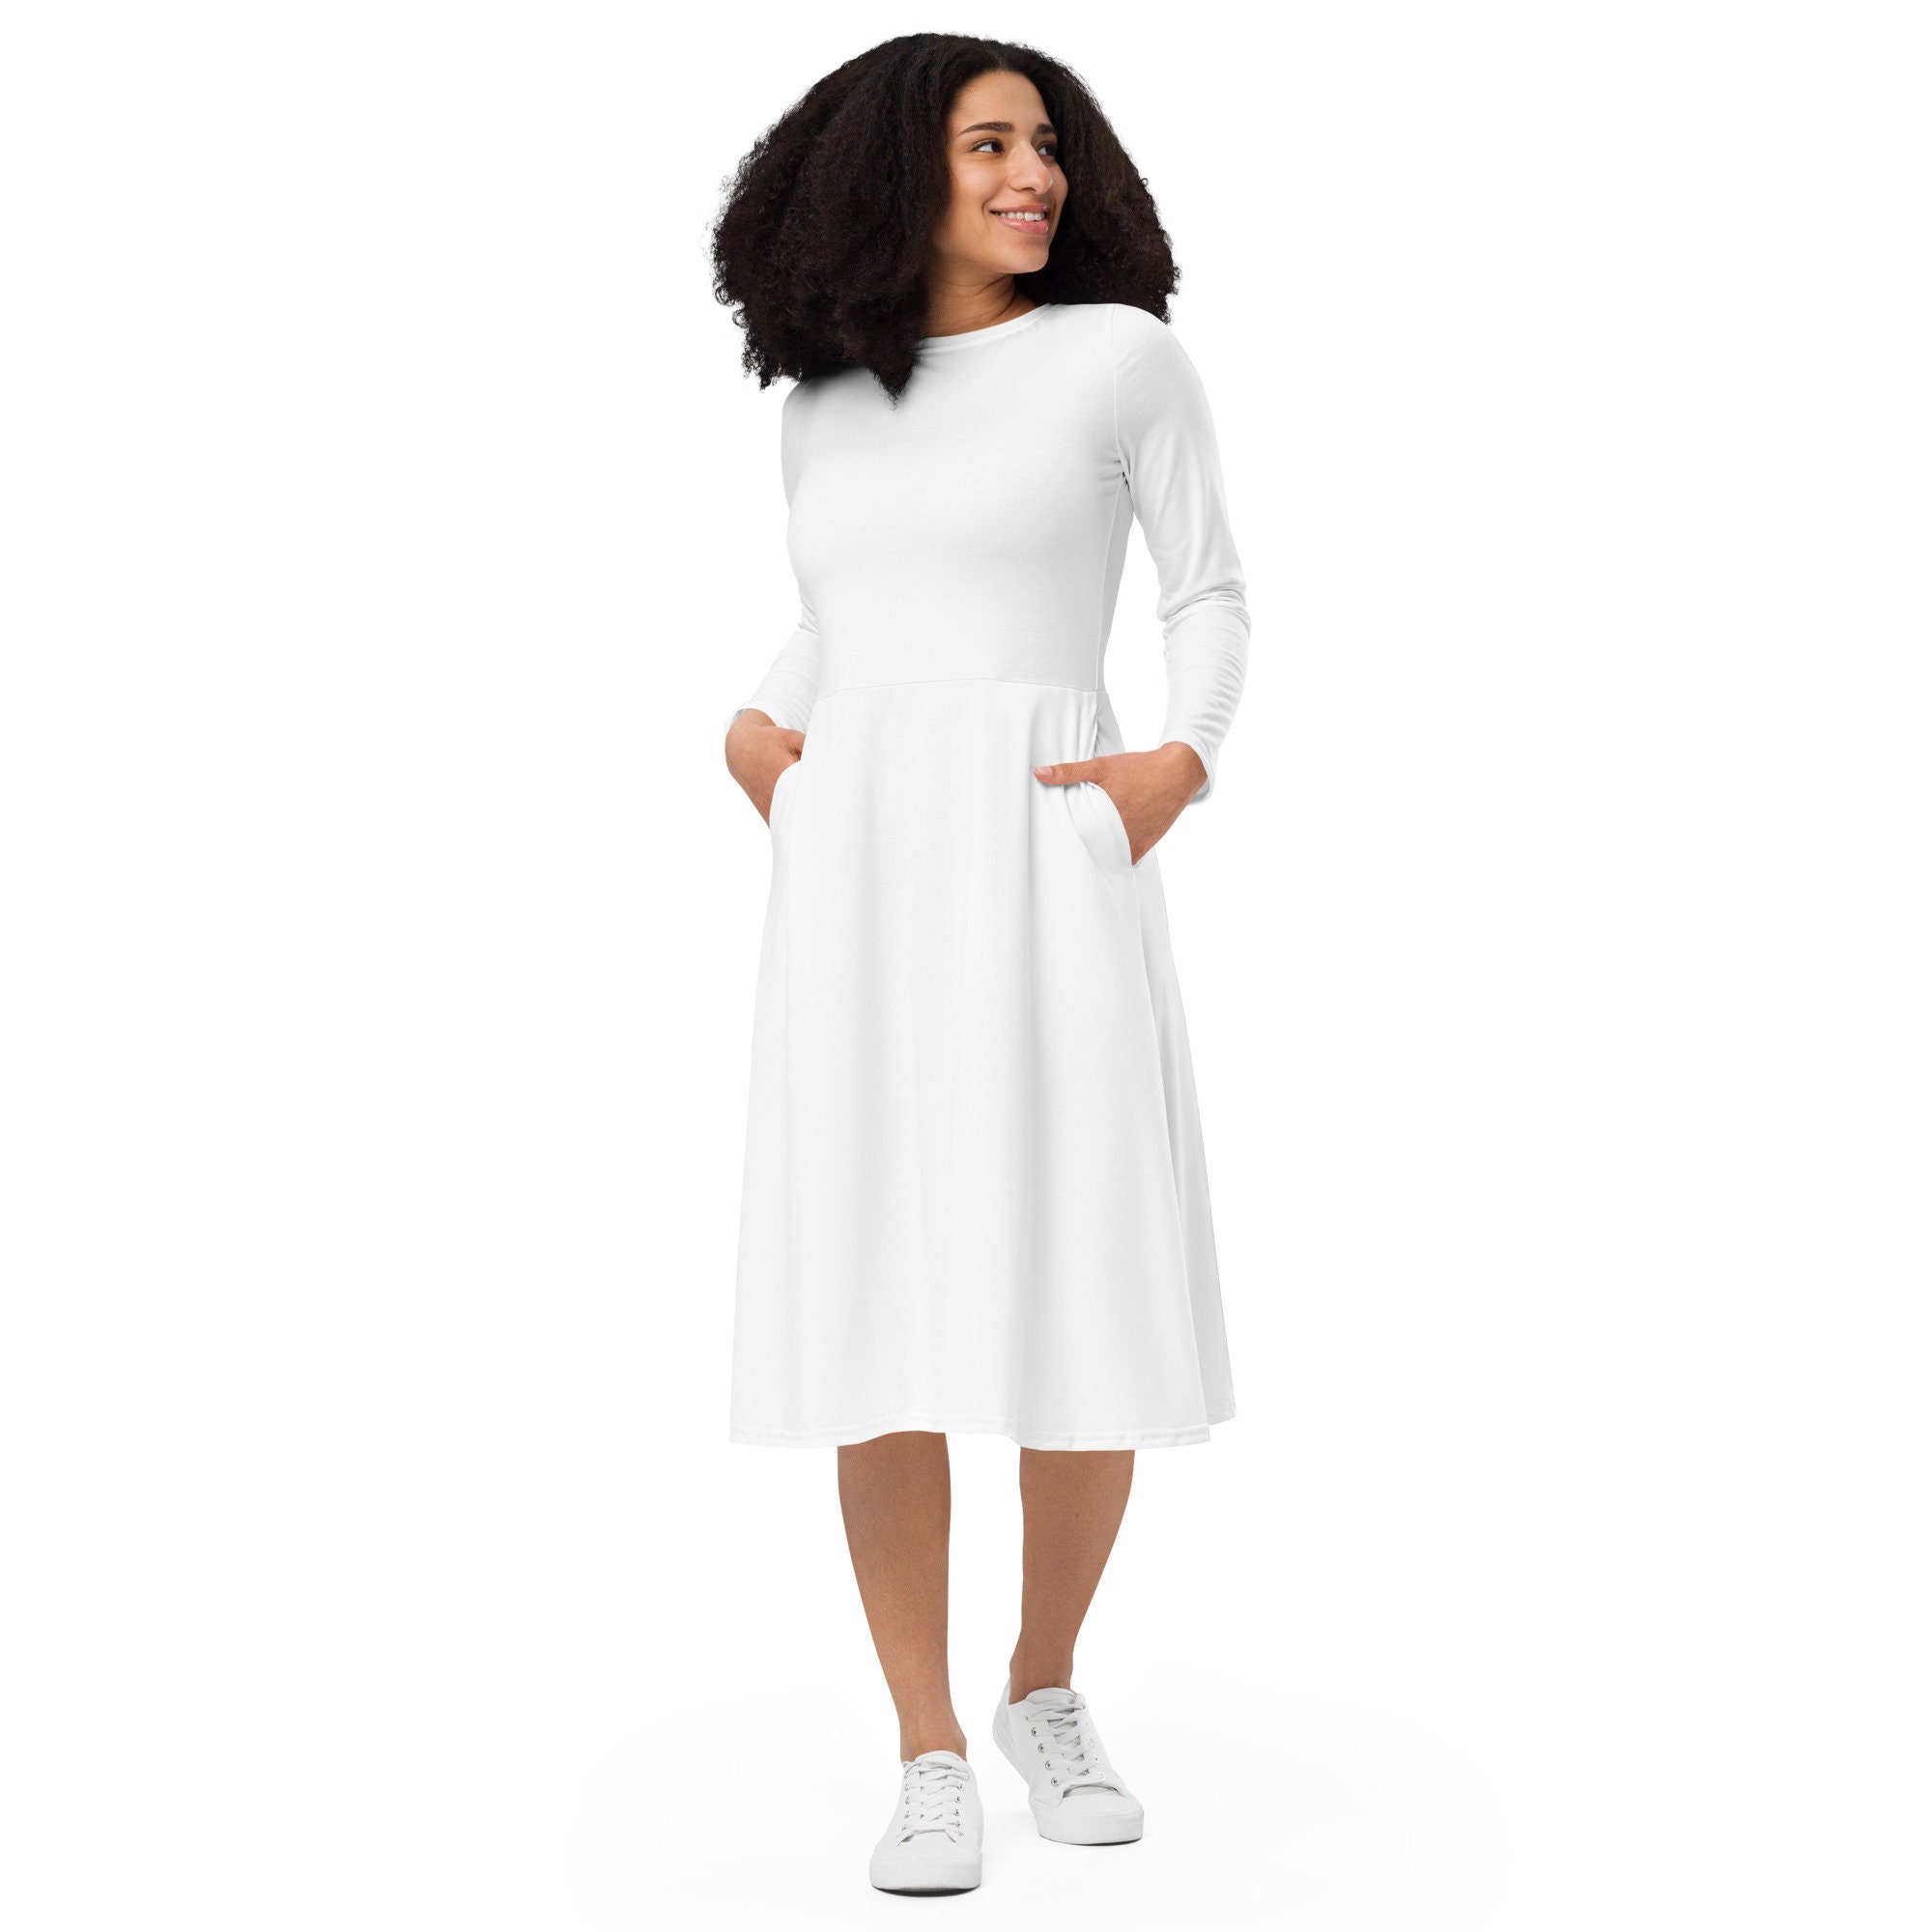 Zpanxa White Maxi Dress for Women, Plus Size Bohemian Casual Dress, Casual  Short Sleeve Off-The-Shoulder Long Dress, Solid Ankle-Length Dress, White  Wedding Guest Dresses White L 